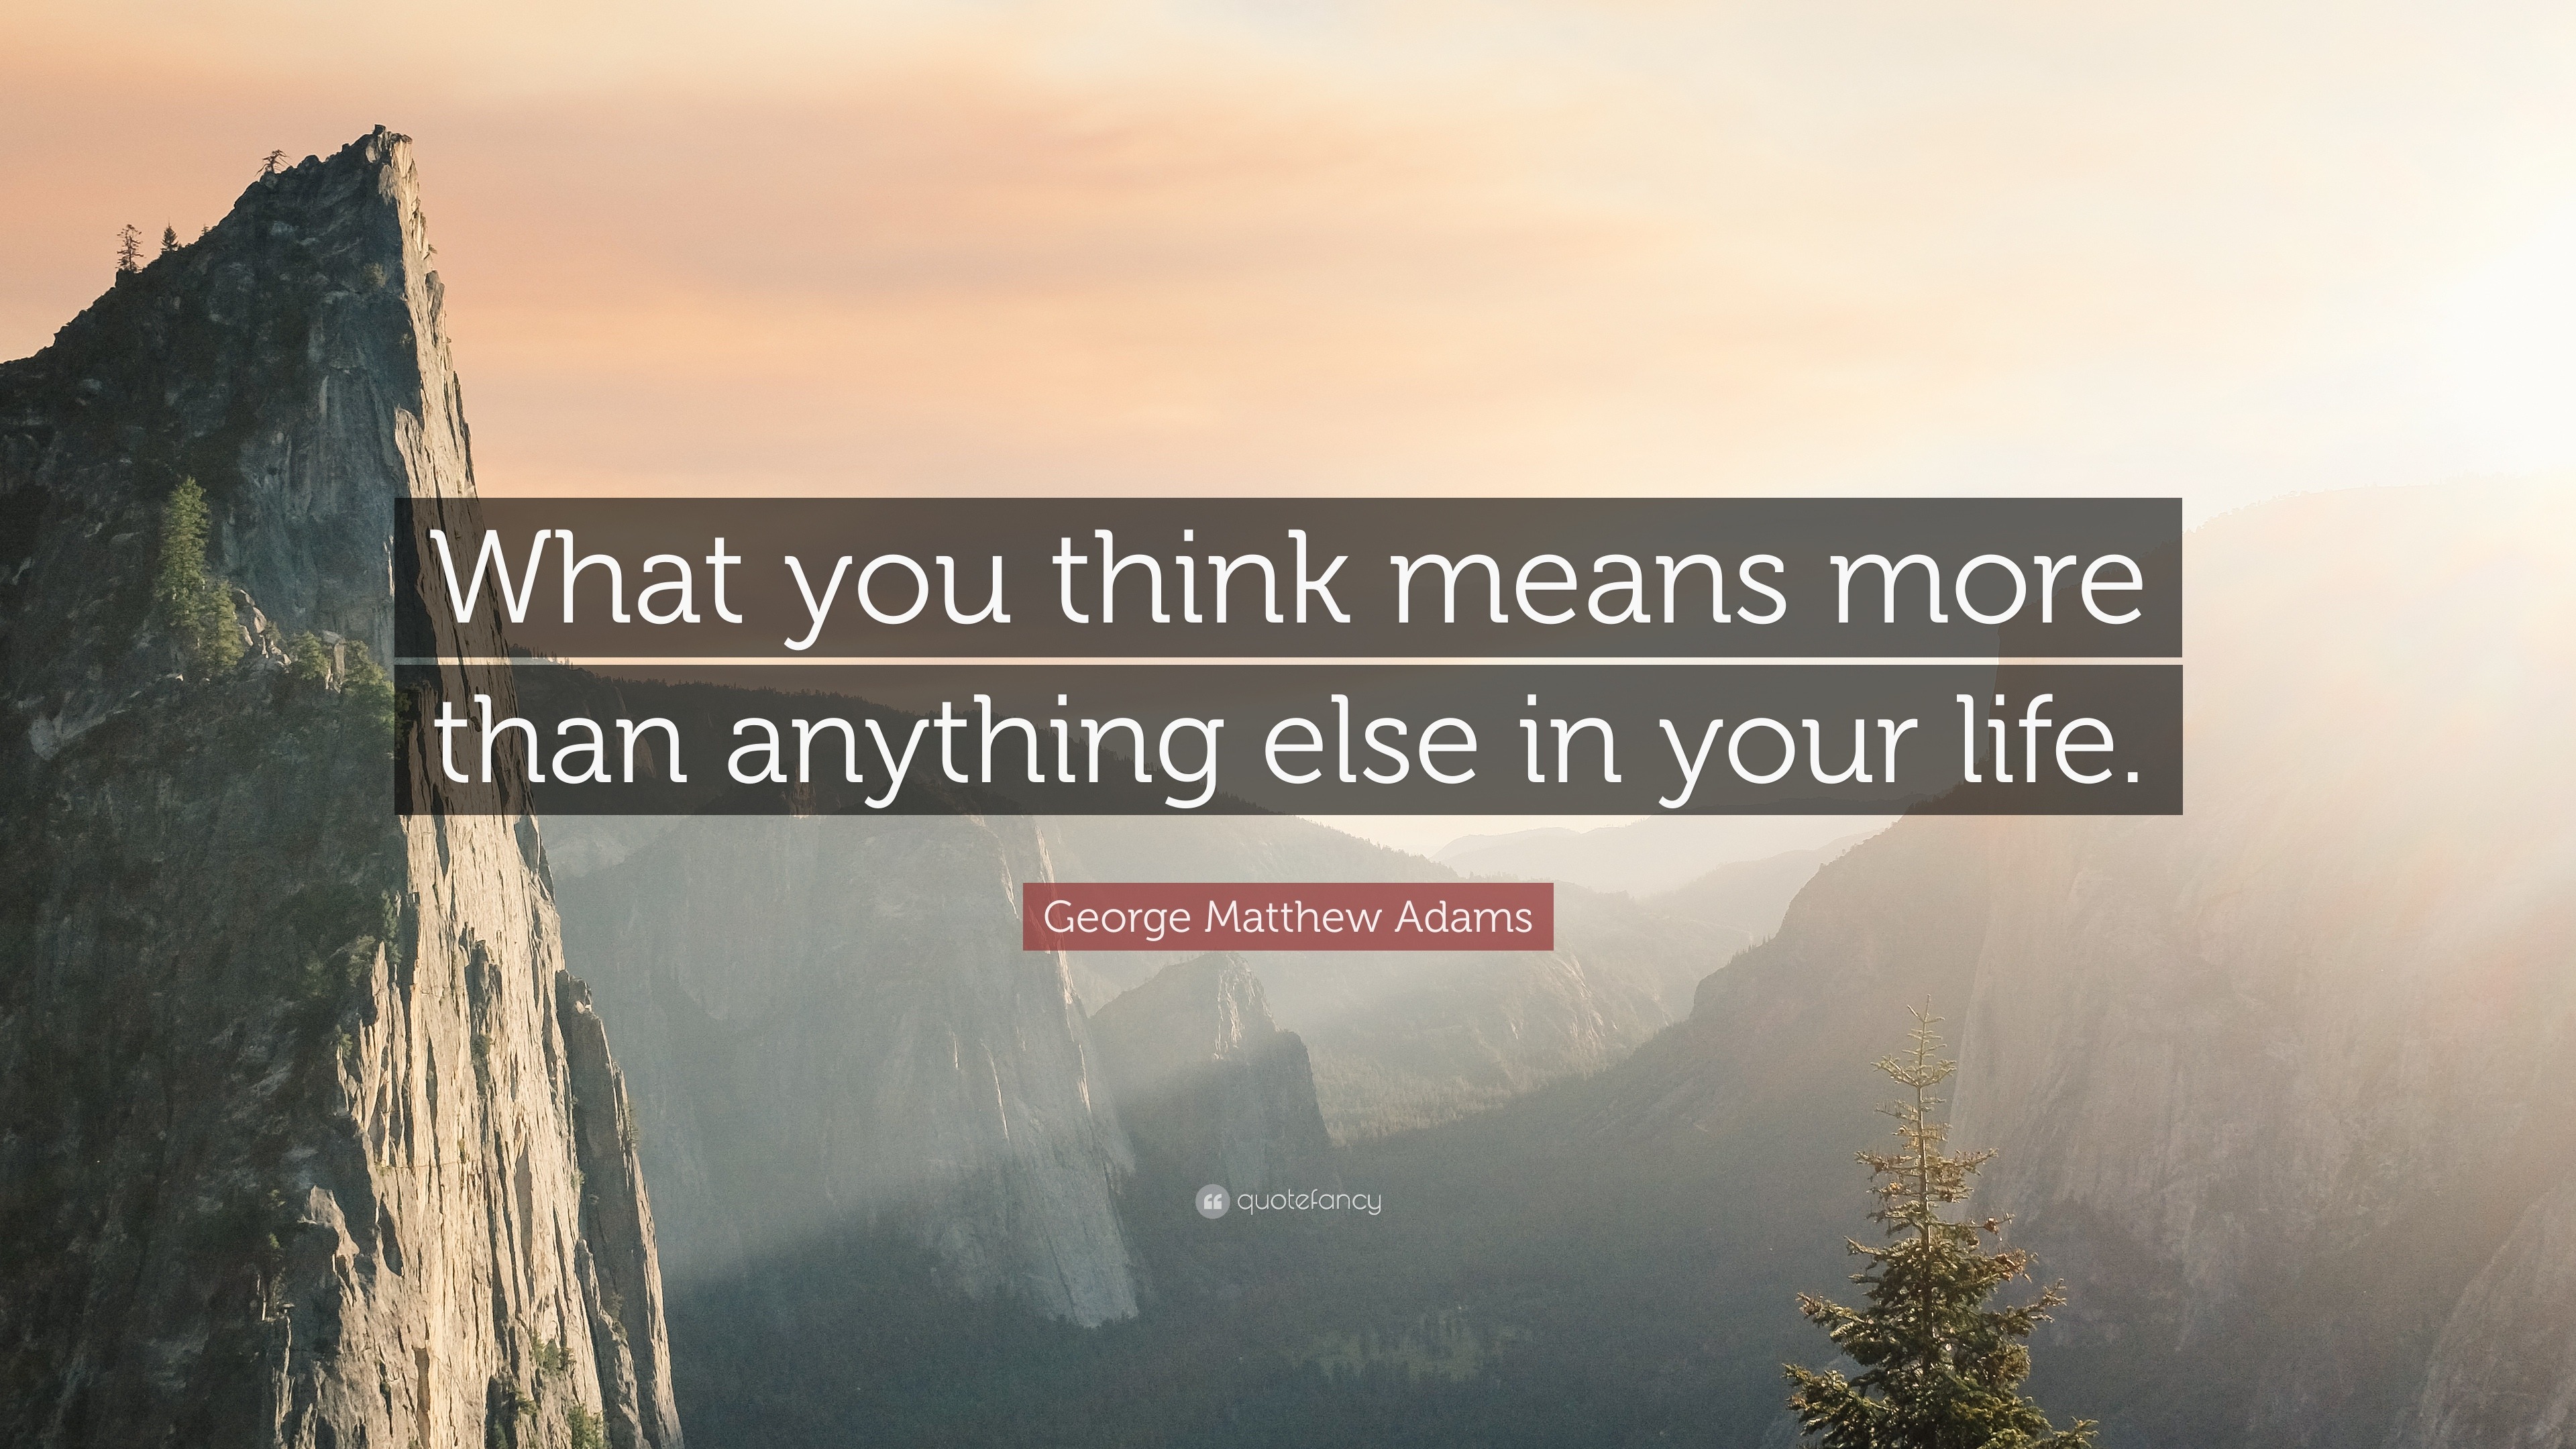 George Matthew Adams Quote: “What you think means more than anything ...